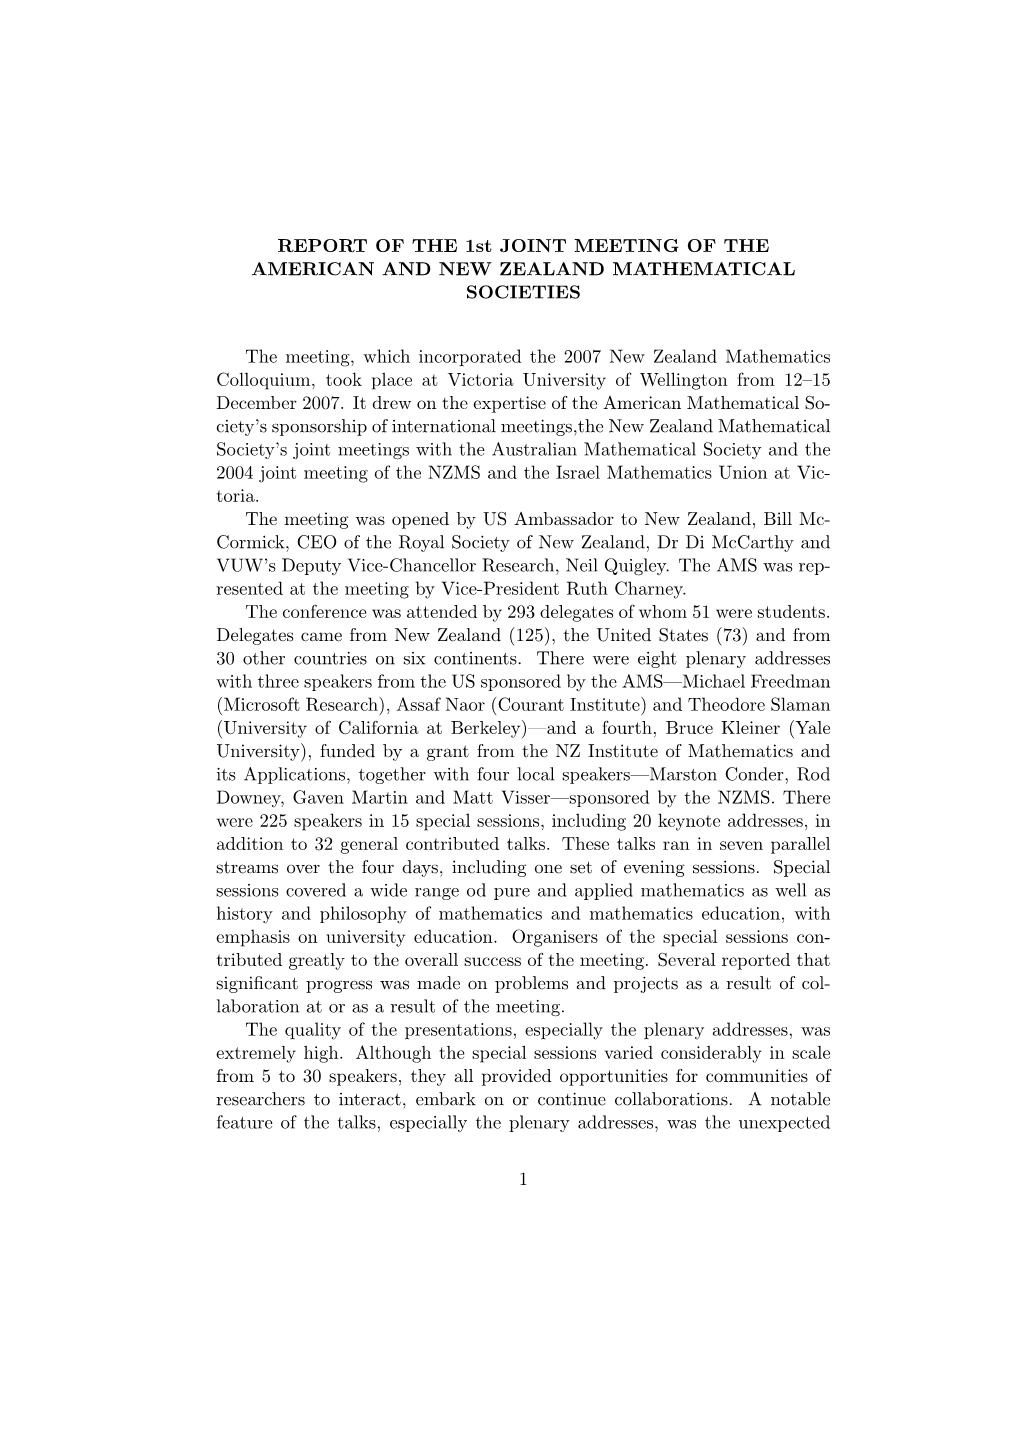 REPORT of the 1St JOINT MEETING of the AMERICAN and NEW ZEALAND MATHEMATICAL SOCIETIES